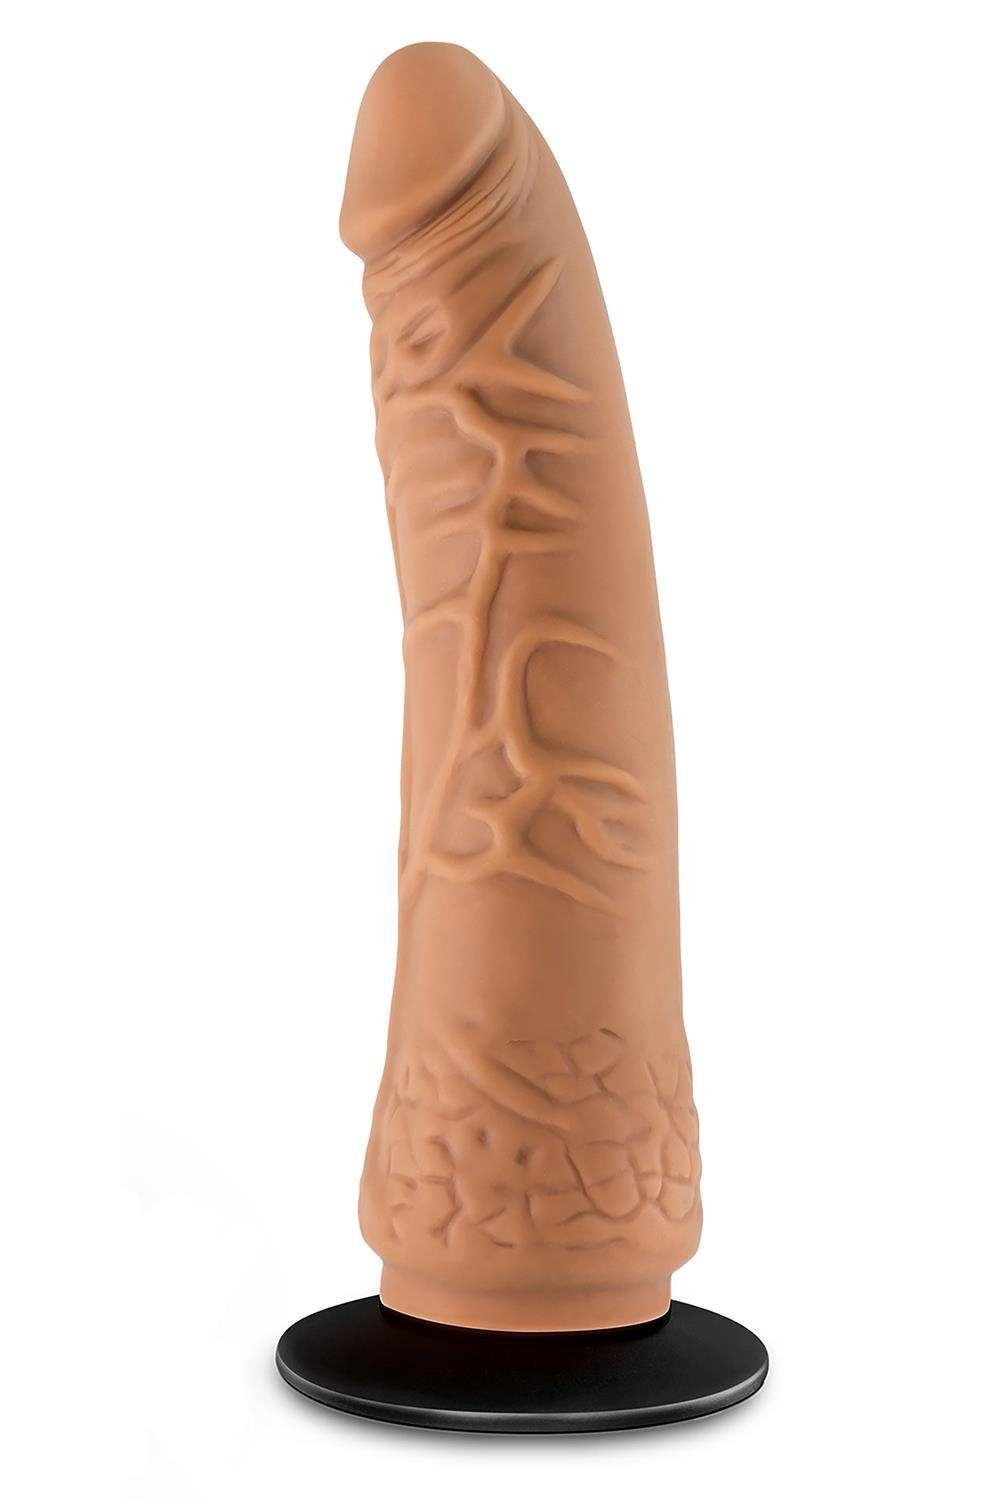 Blush Cup Mocha Lock Dildo With Hexanite 19cm On Dildo Adapter Inch Suction 7.5